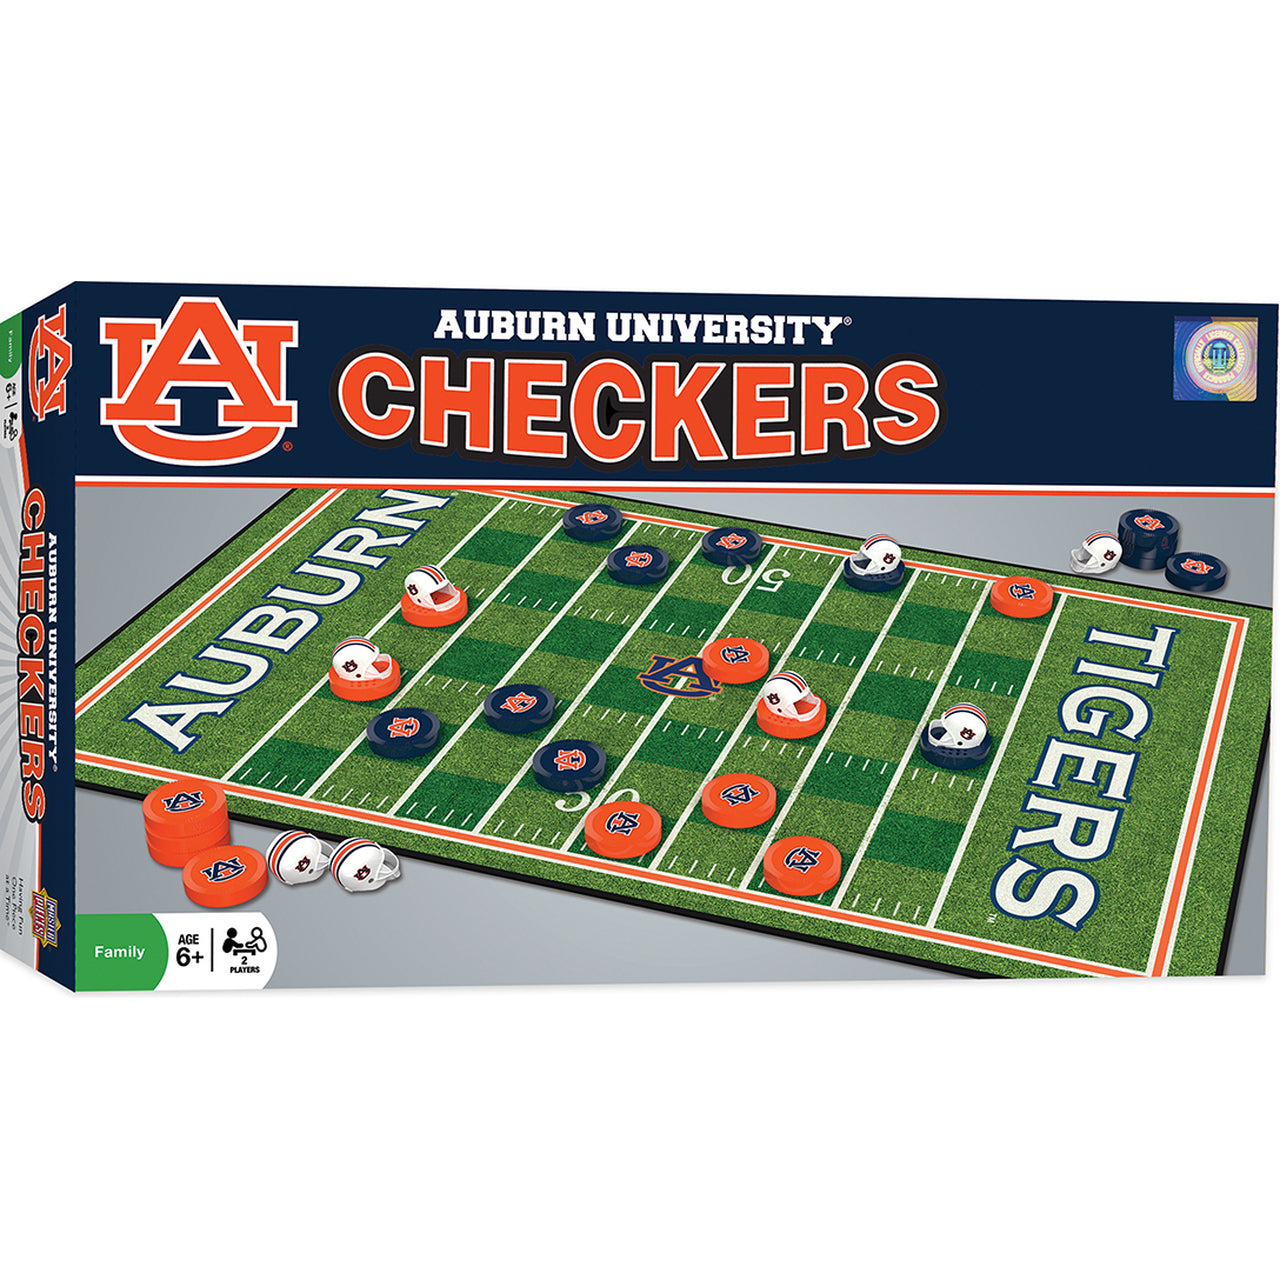 Auburn Checkers Board Game by Masterpieces